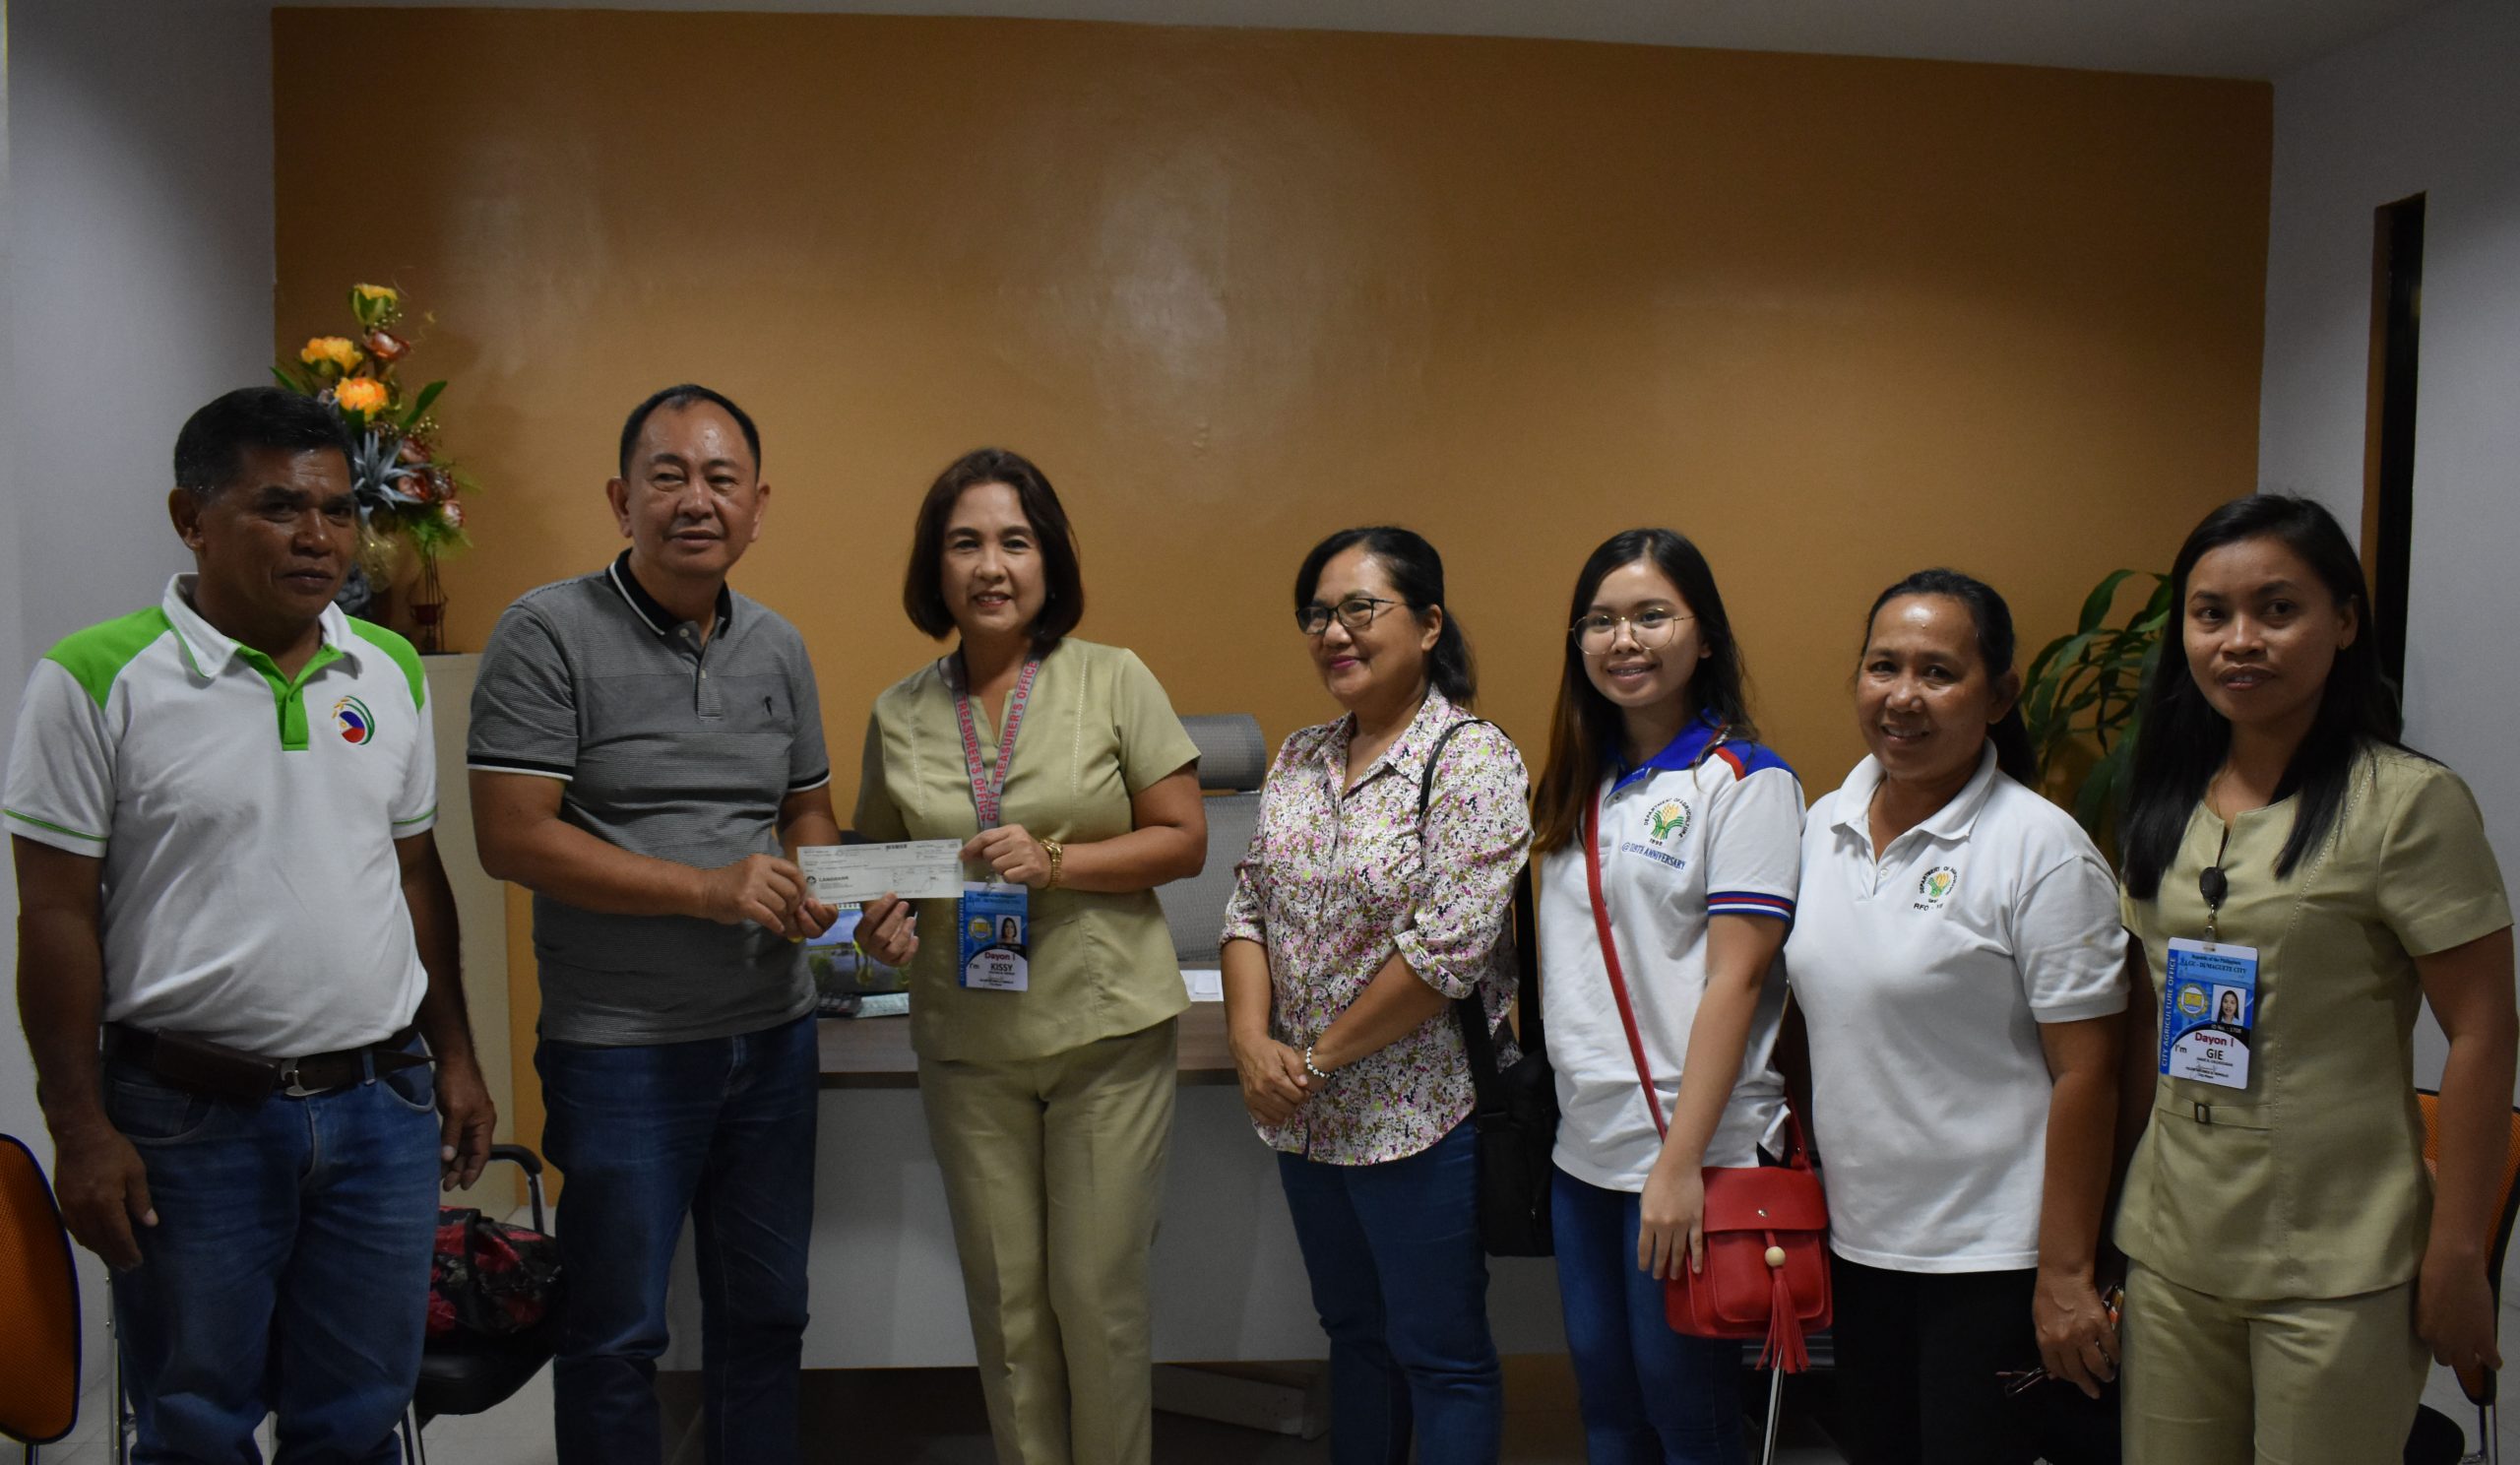 DA-RFO VII now set to implement SAAD Projects in Negros Oriental